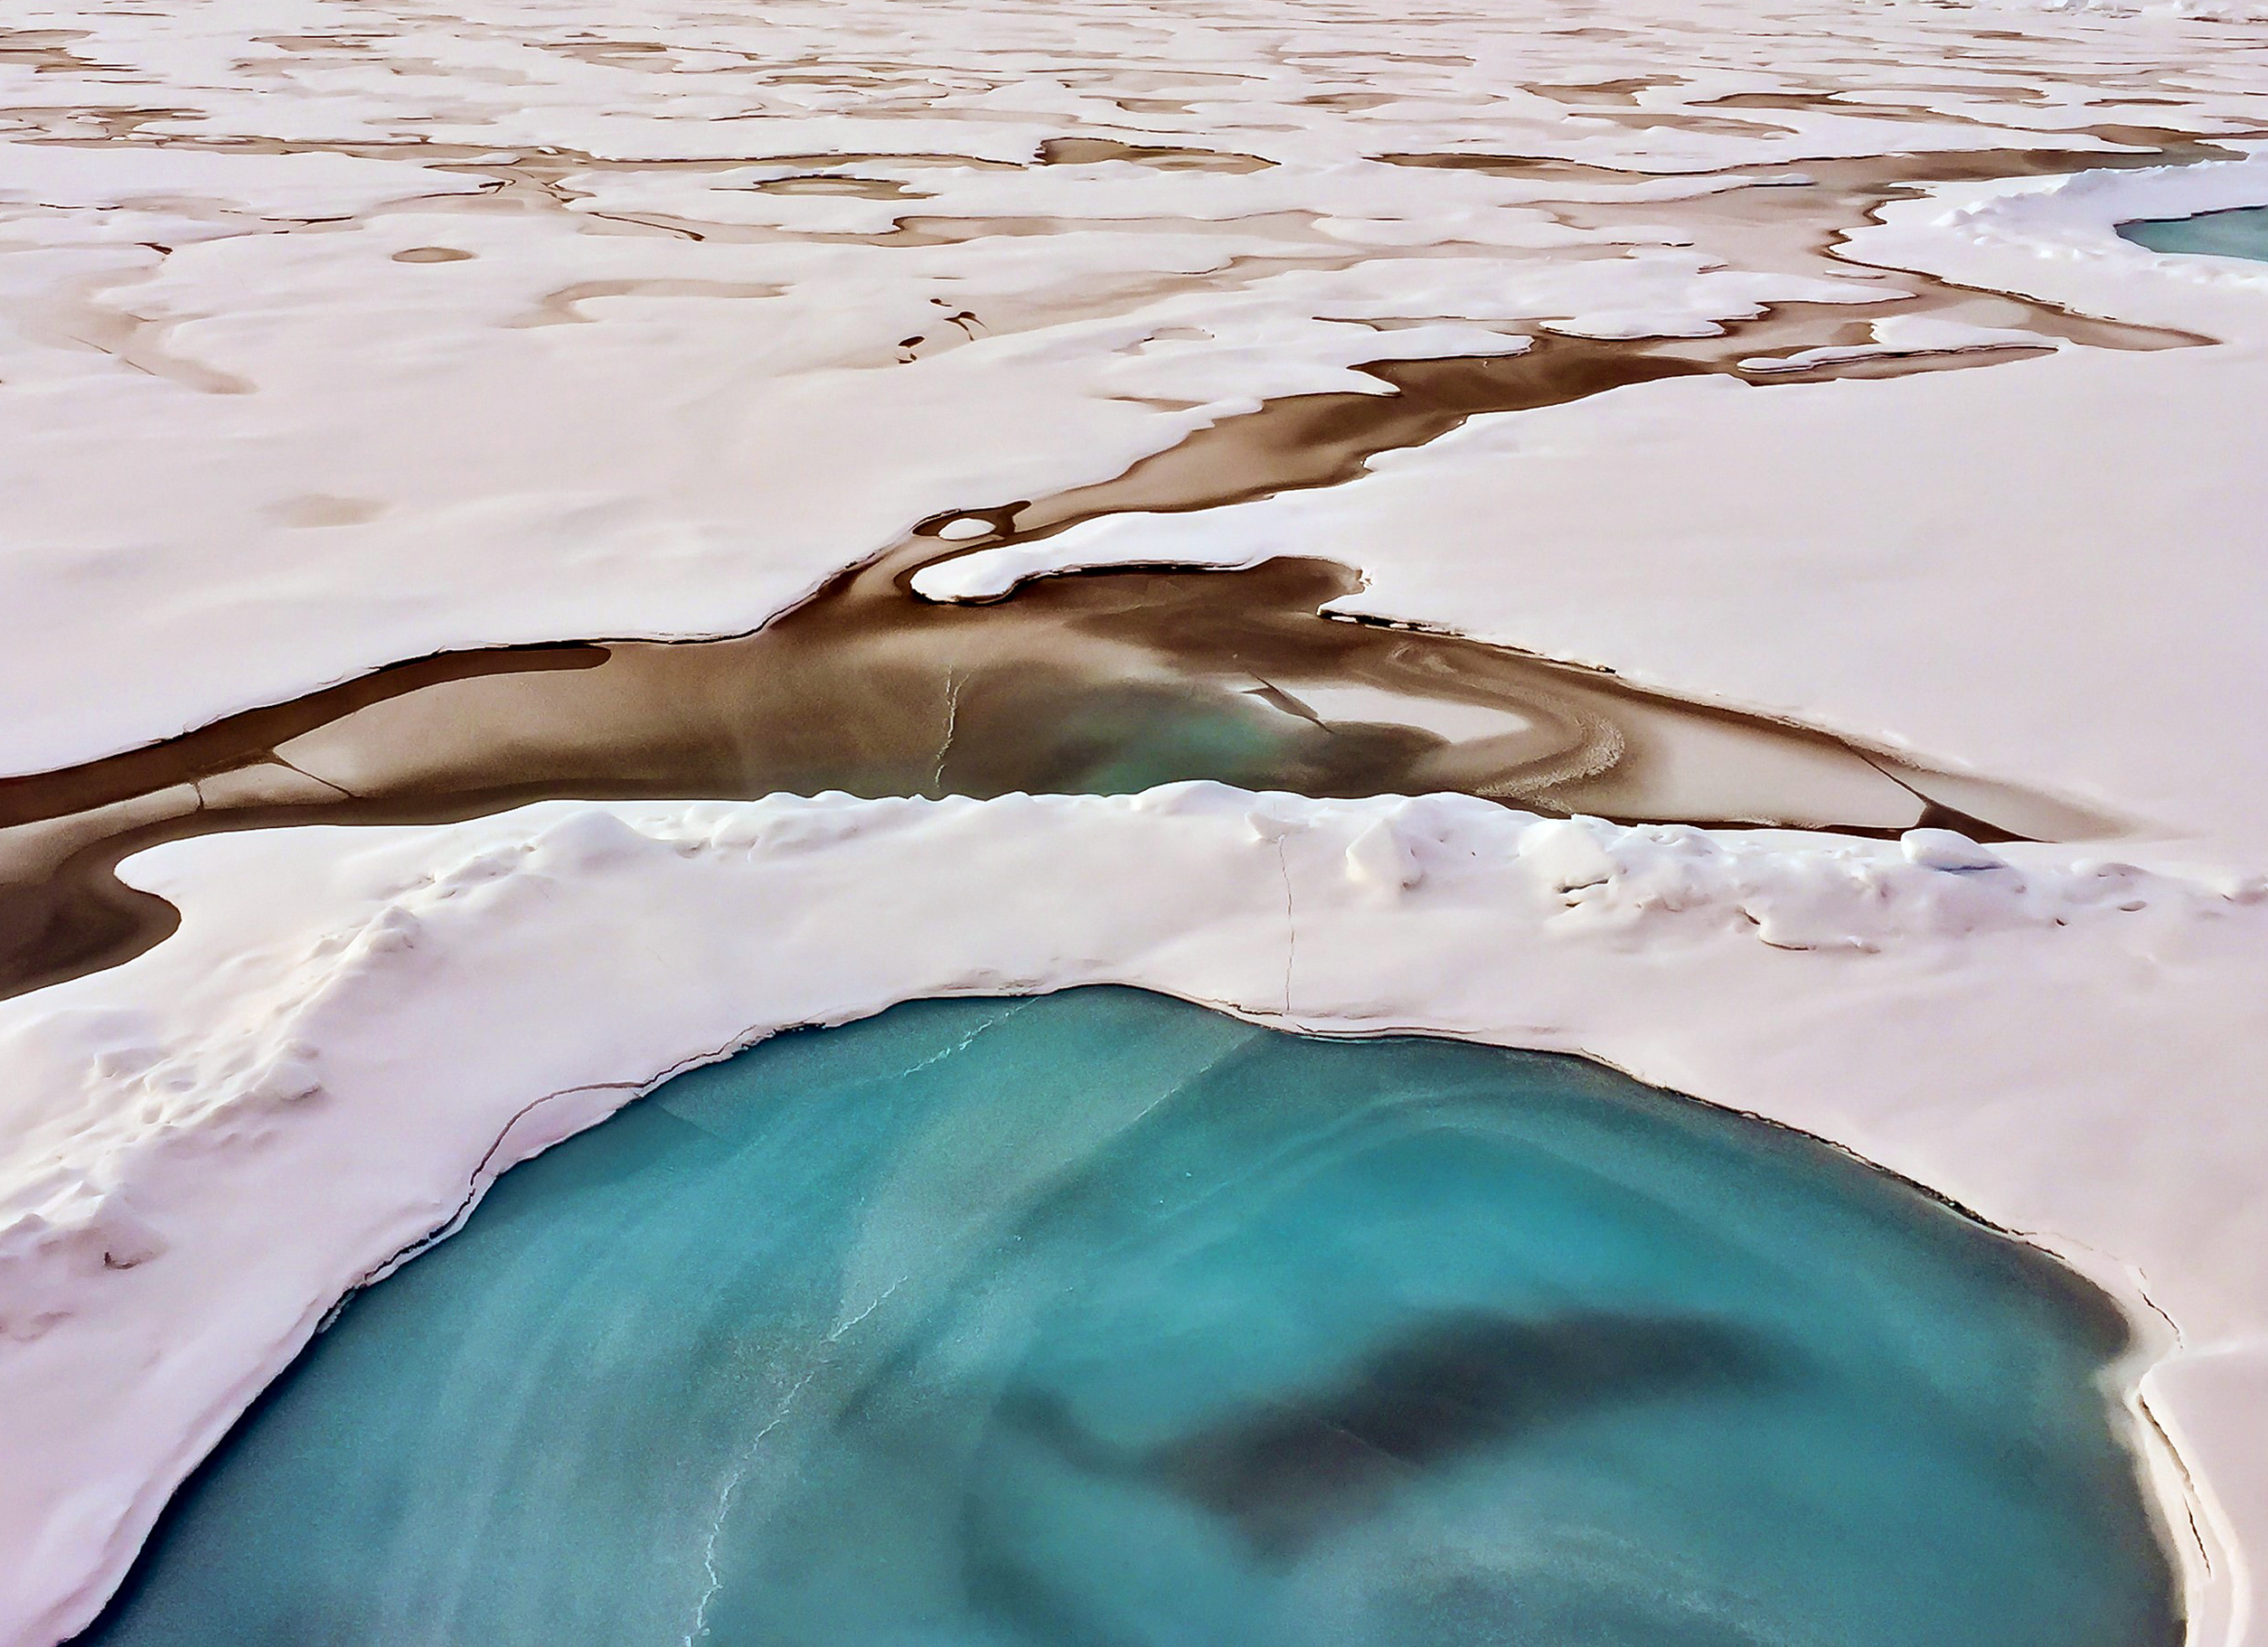 A frozen melt pond and sea ice seascape at 86°04'n, 168°21'e on august 30, 2015.